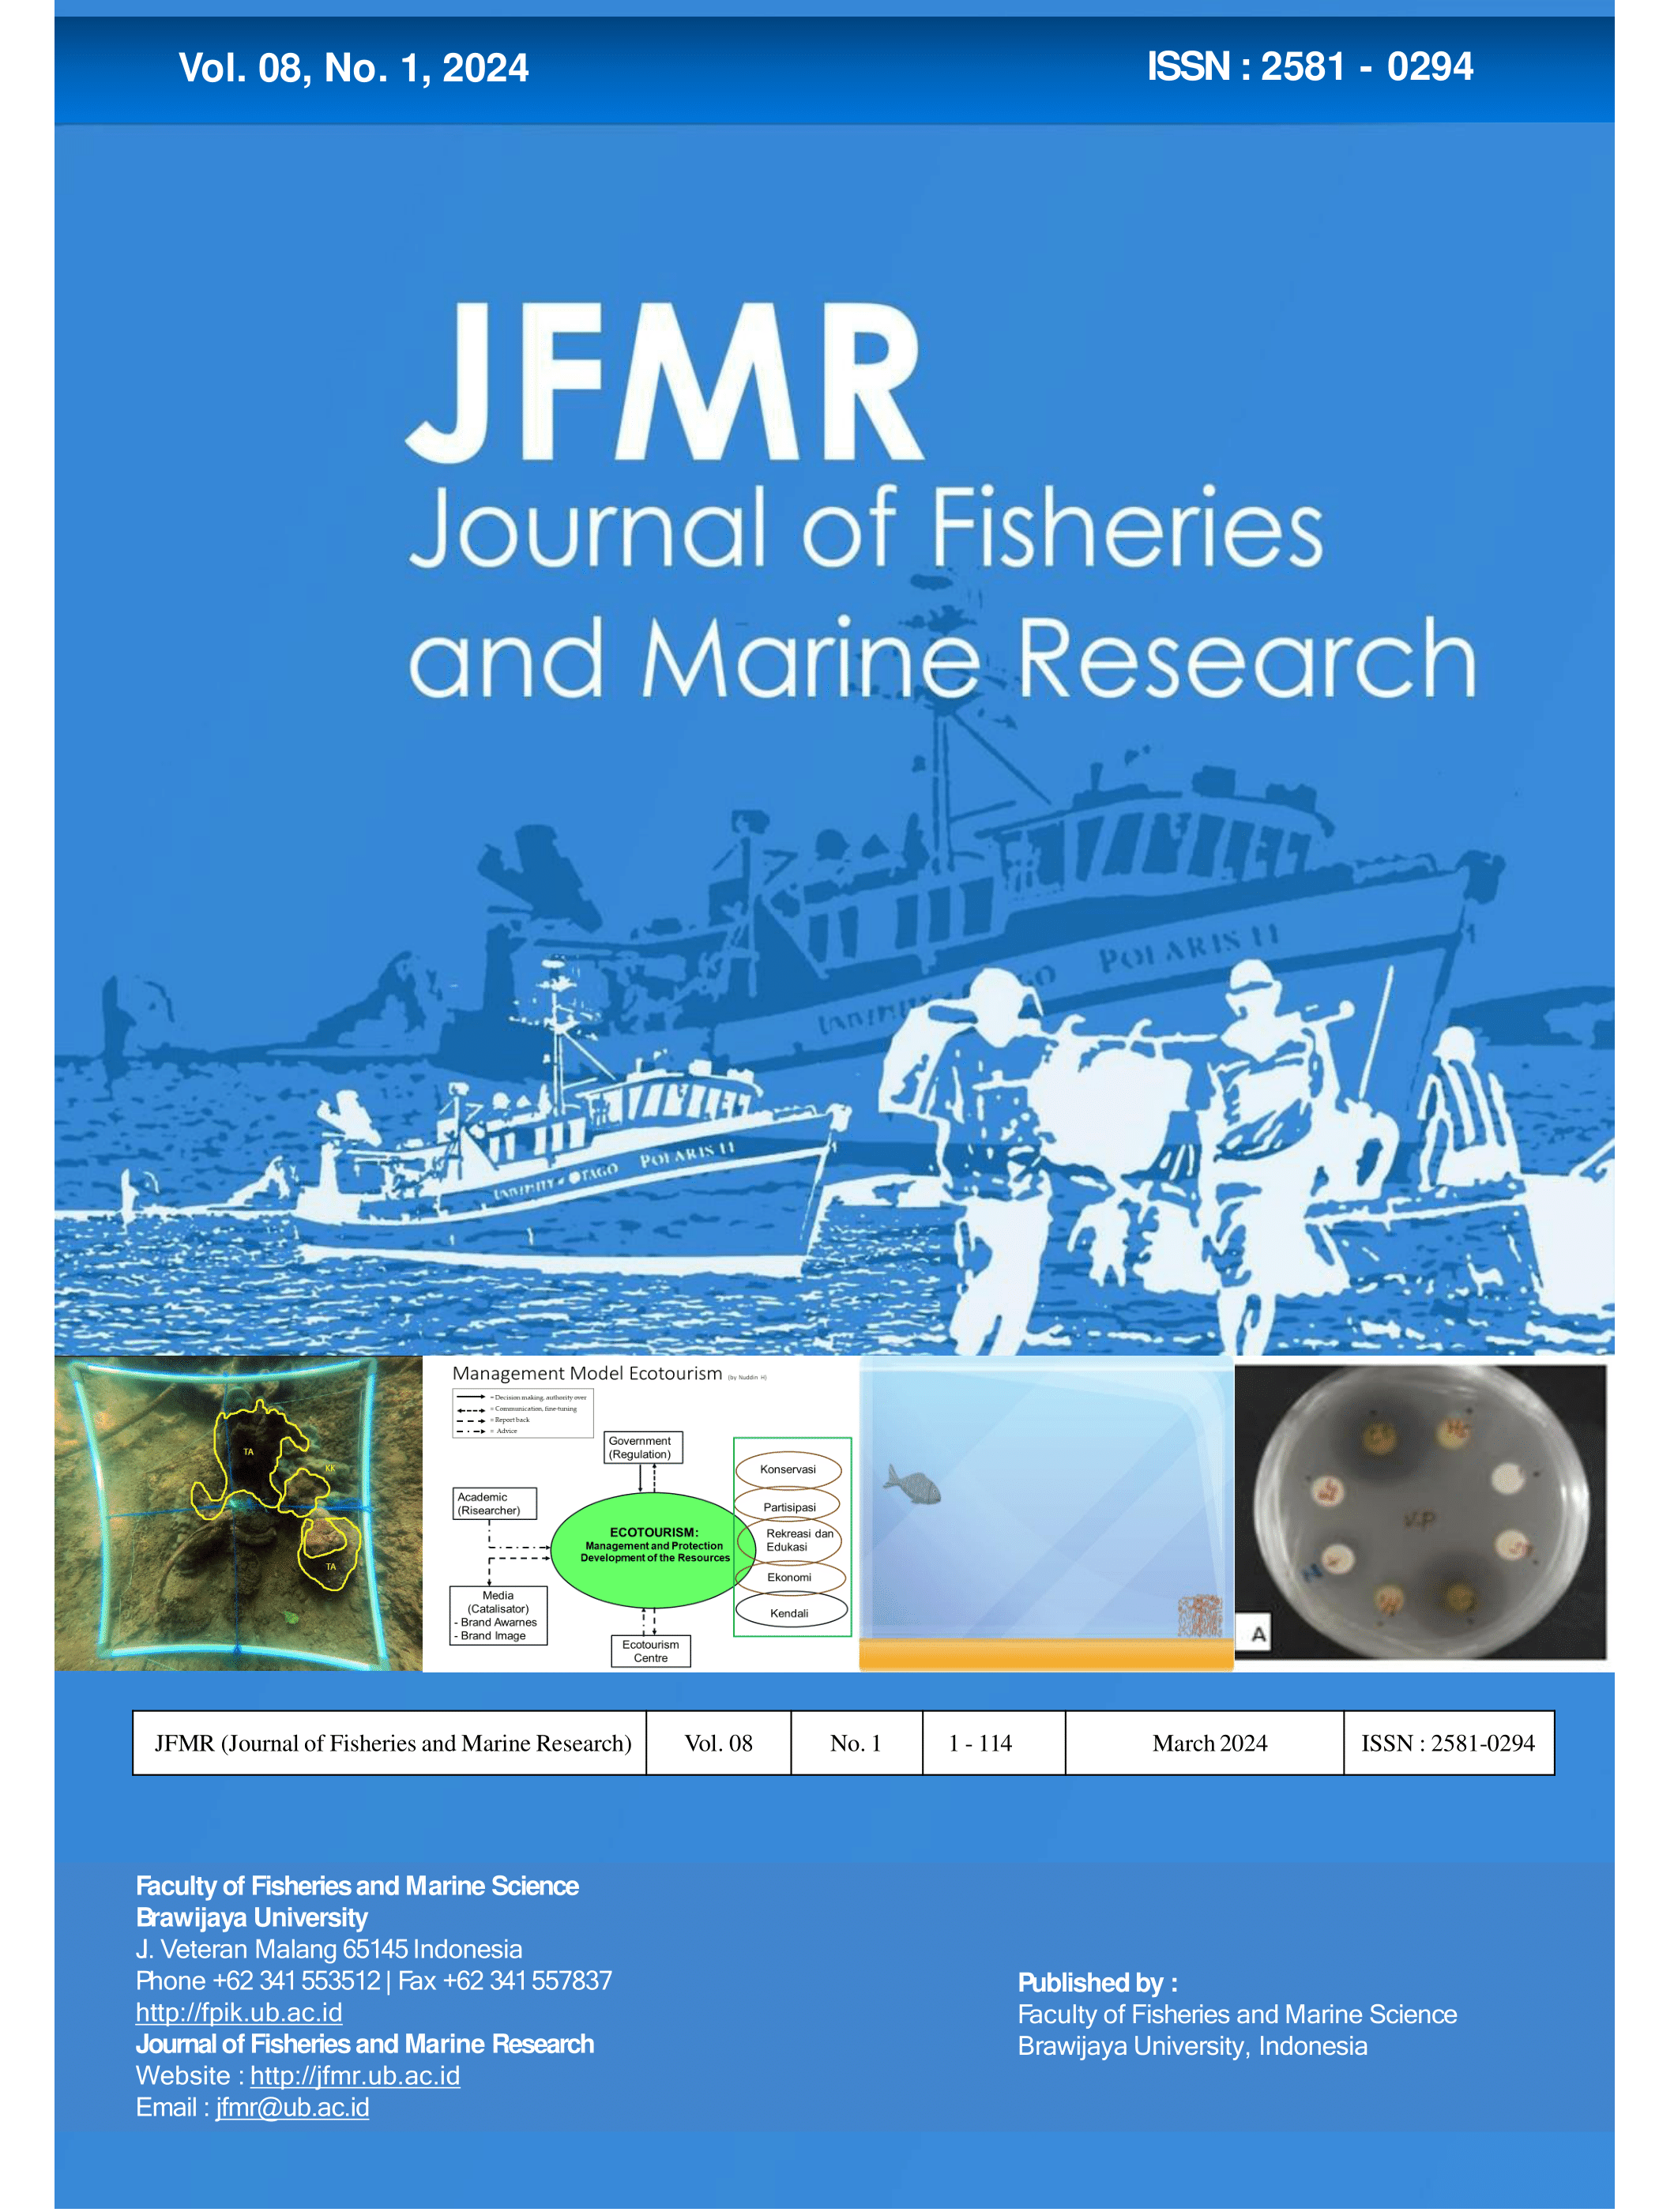 					View Vol. 8 No. 1 (2024): JFMR on March
				